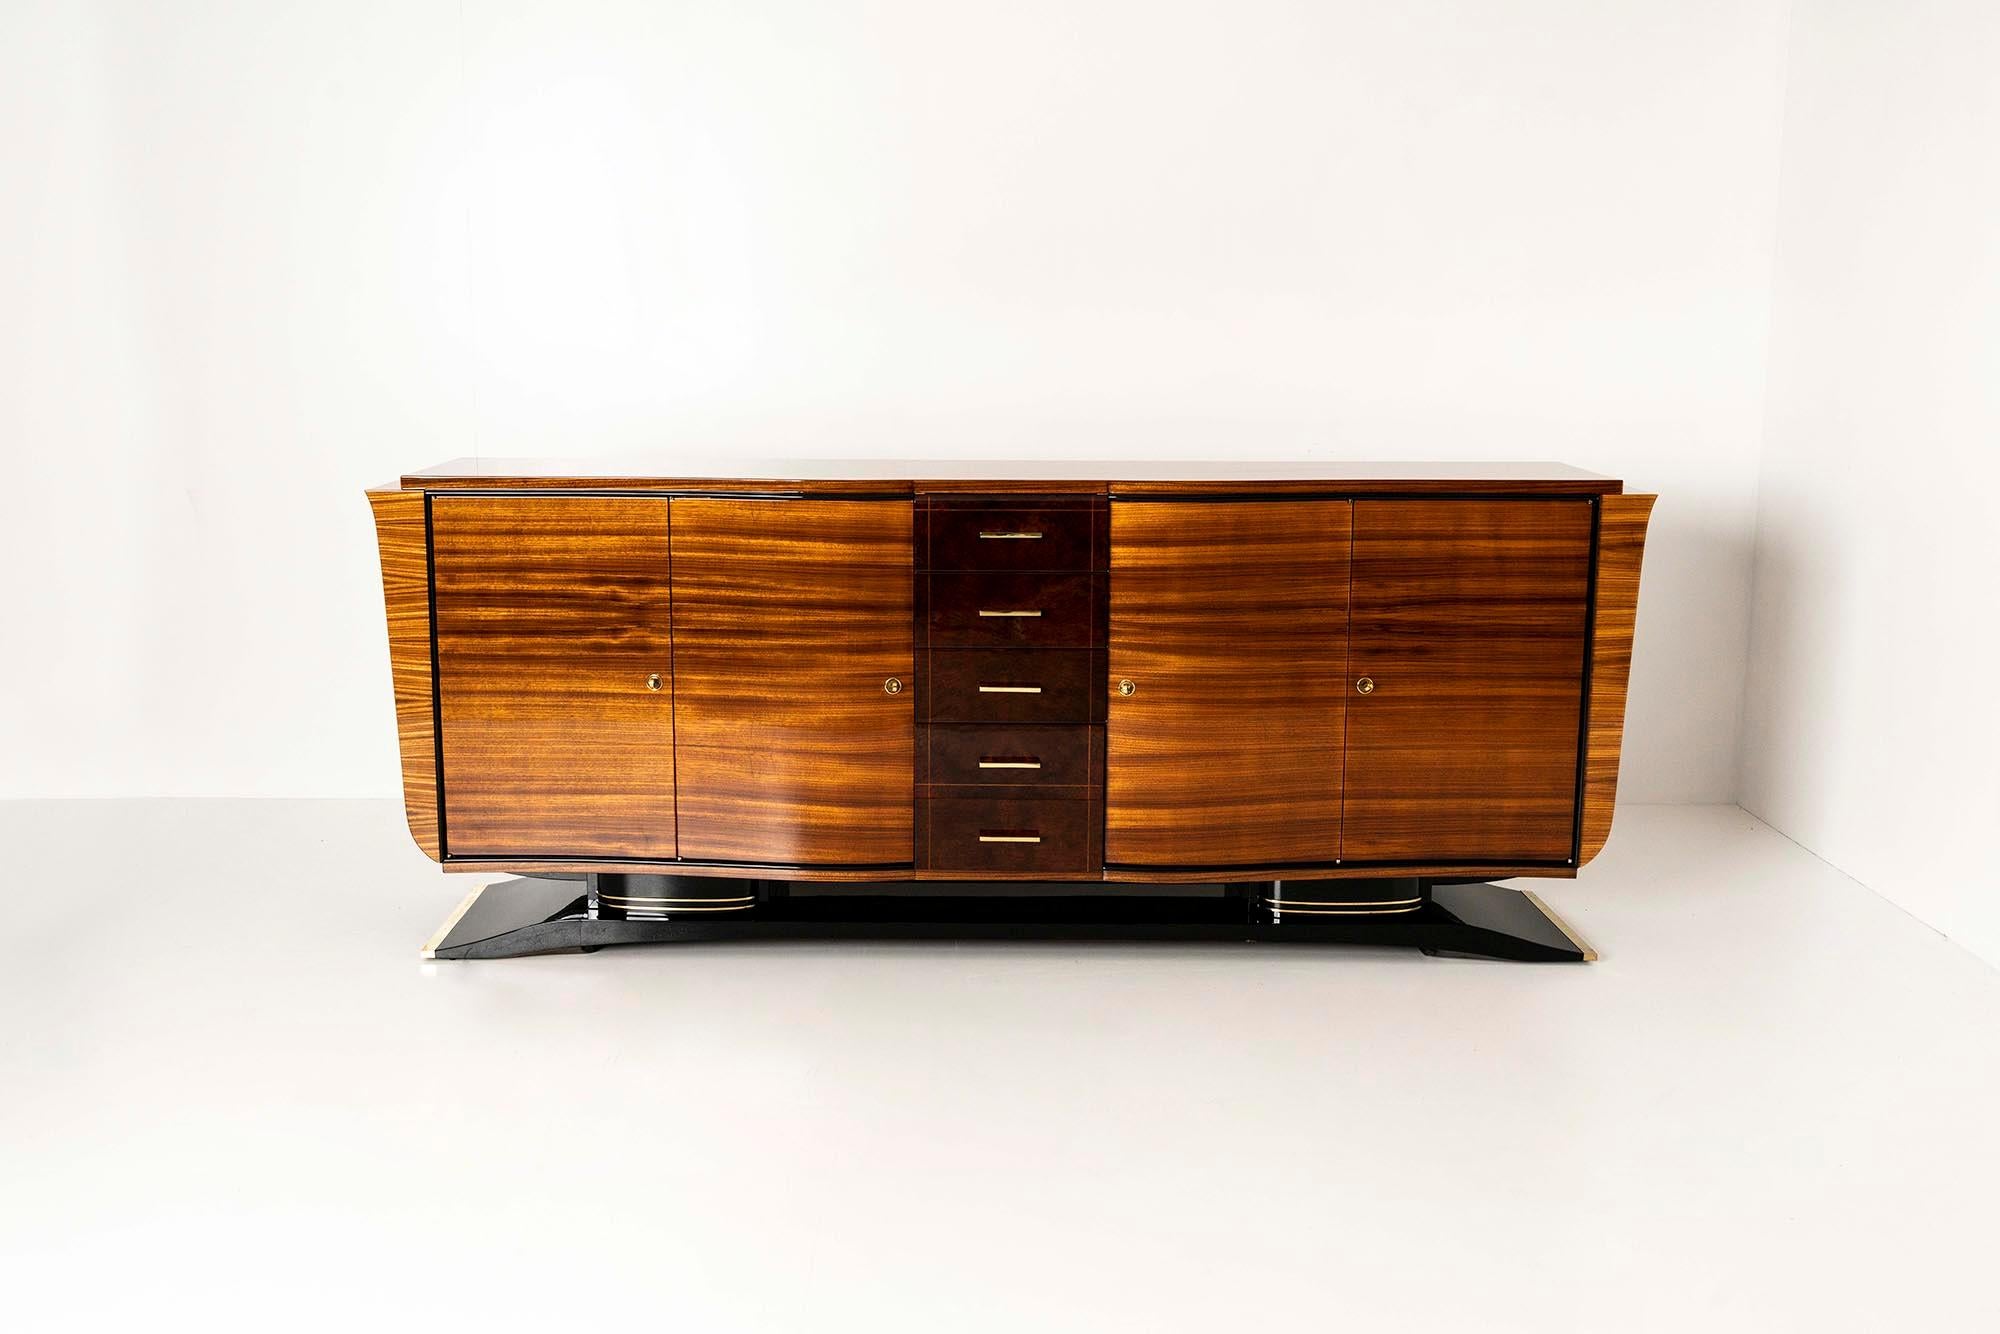 French Grand Art Deco Sideboard in Rosewood Veneer with Brass Details, France, 1930s For Sale